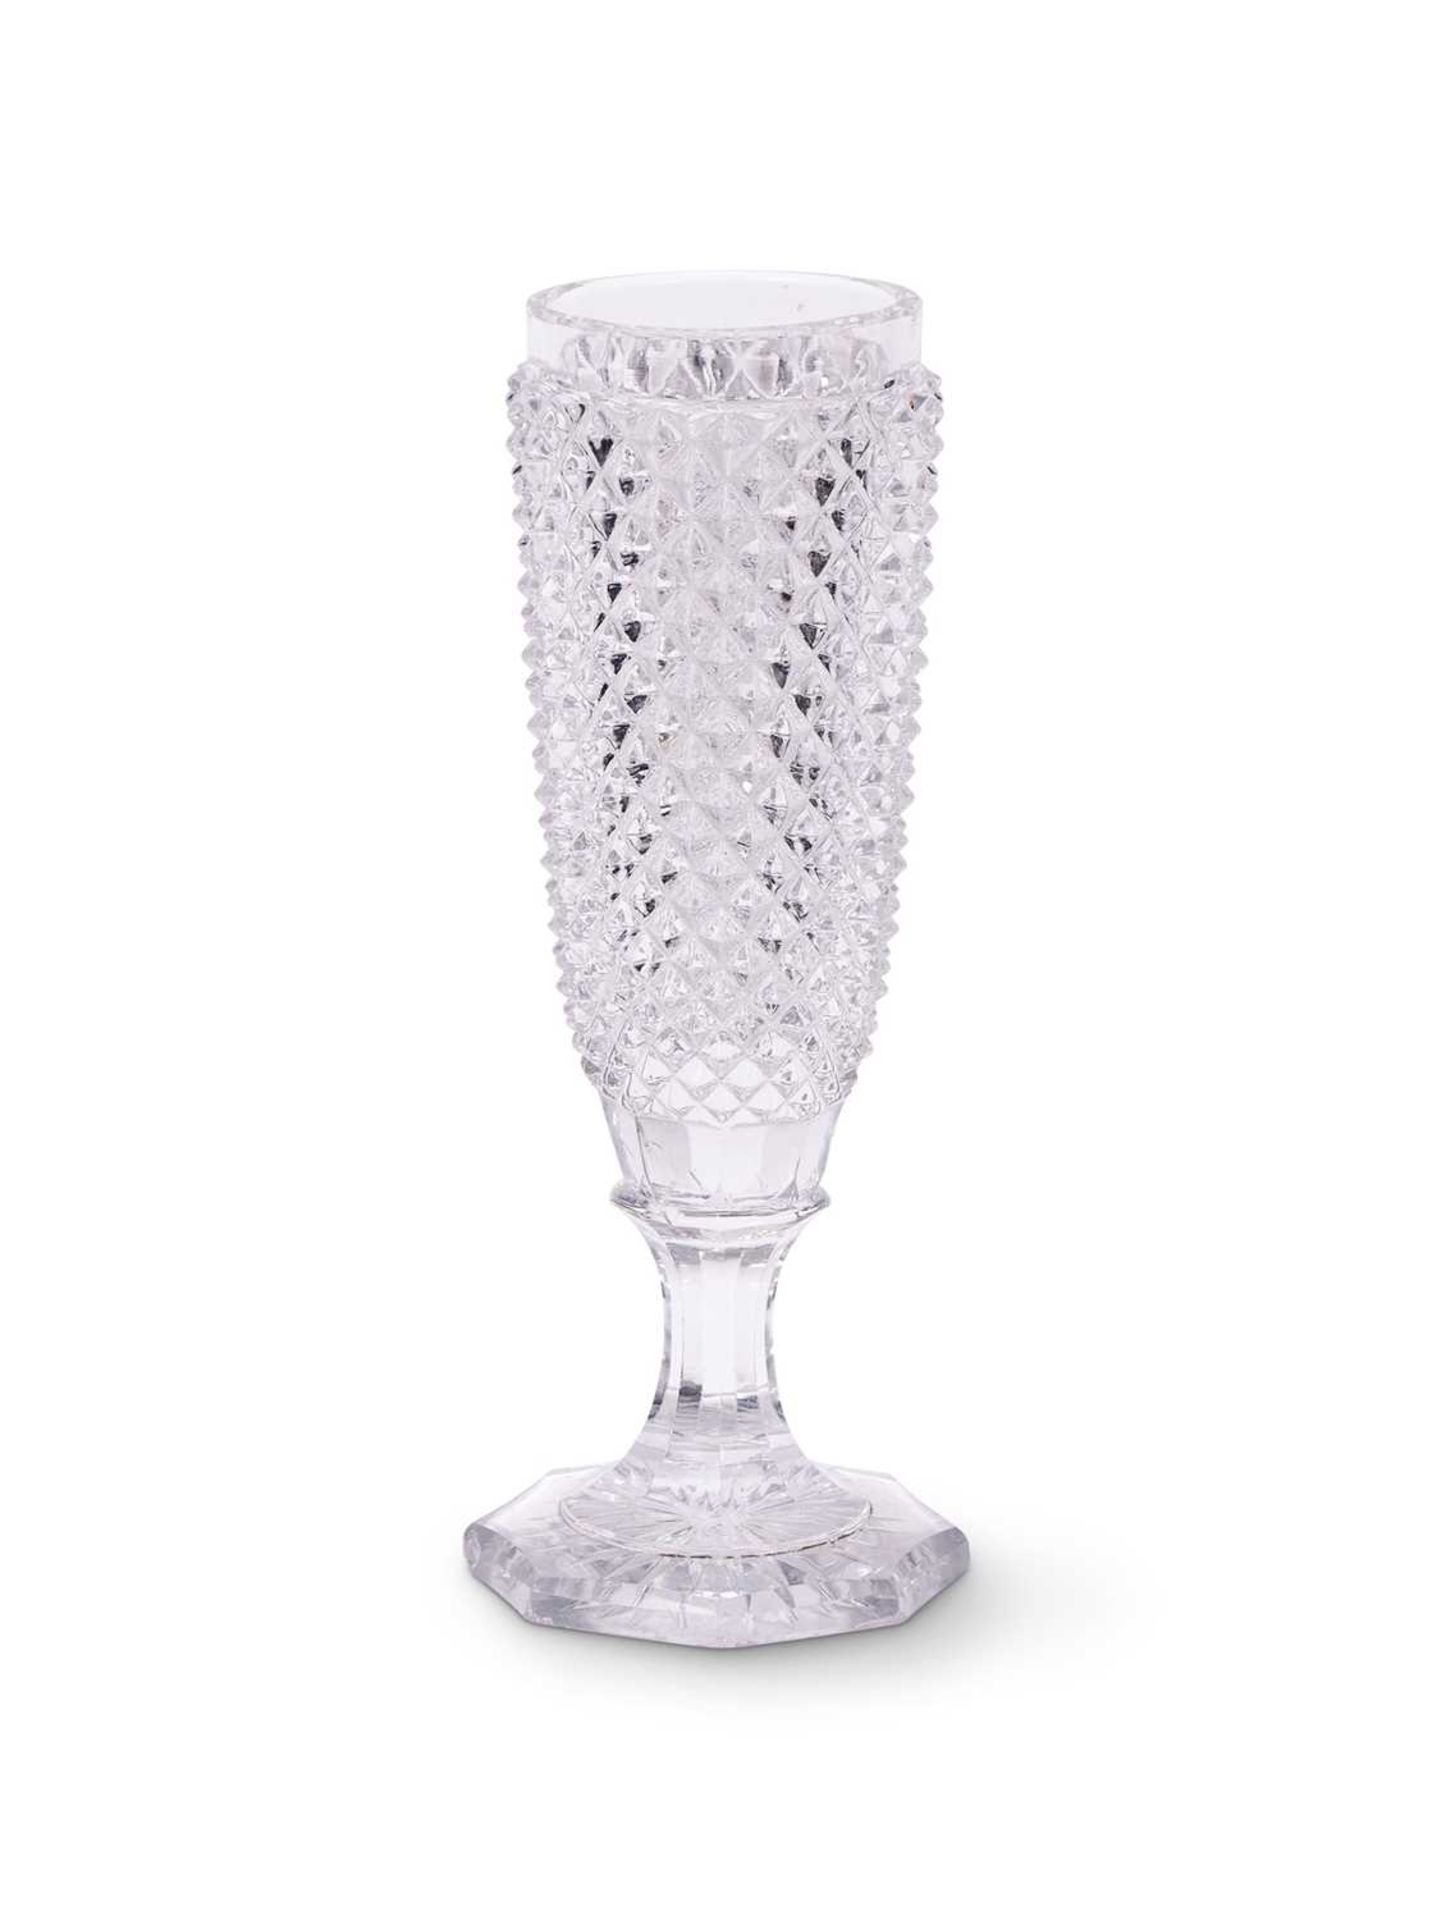 BACCARAT: A SET OF EARLY 20TH CENTURY GLASS FLUTES WITH MATCHING TRAY - Image 2 of 2